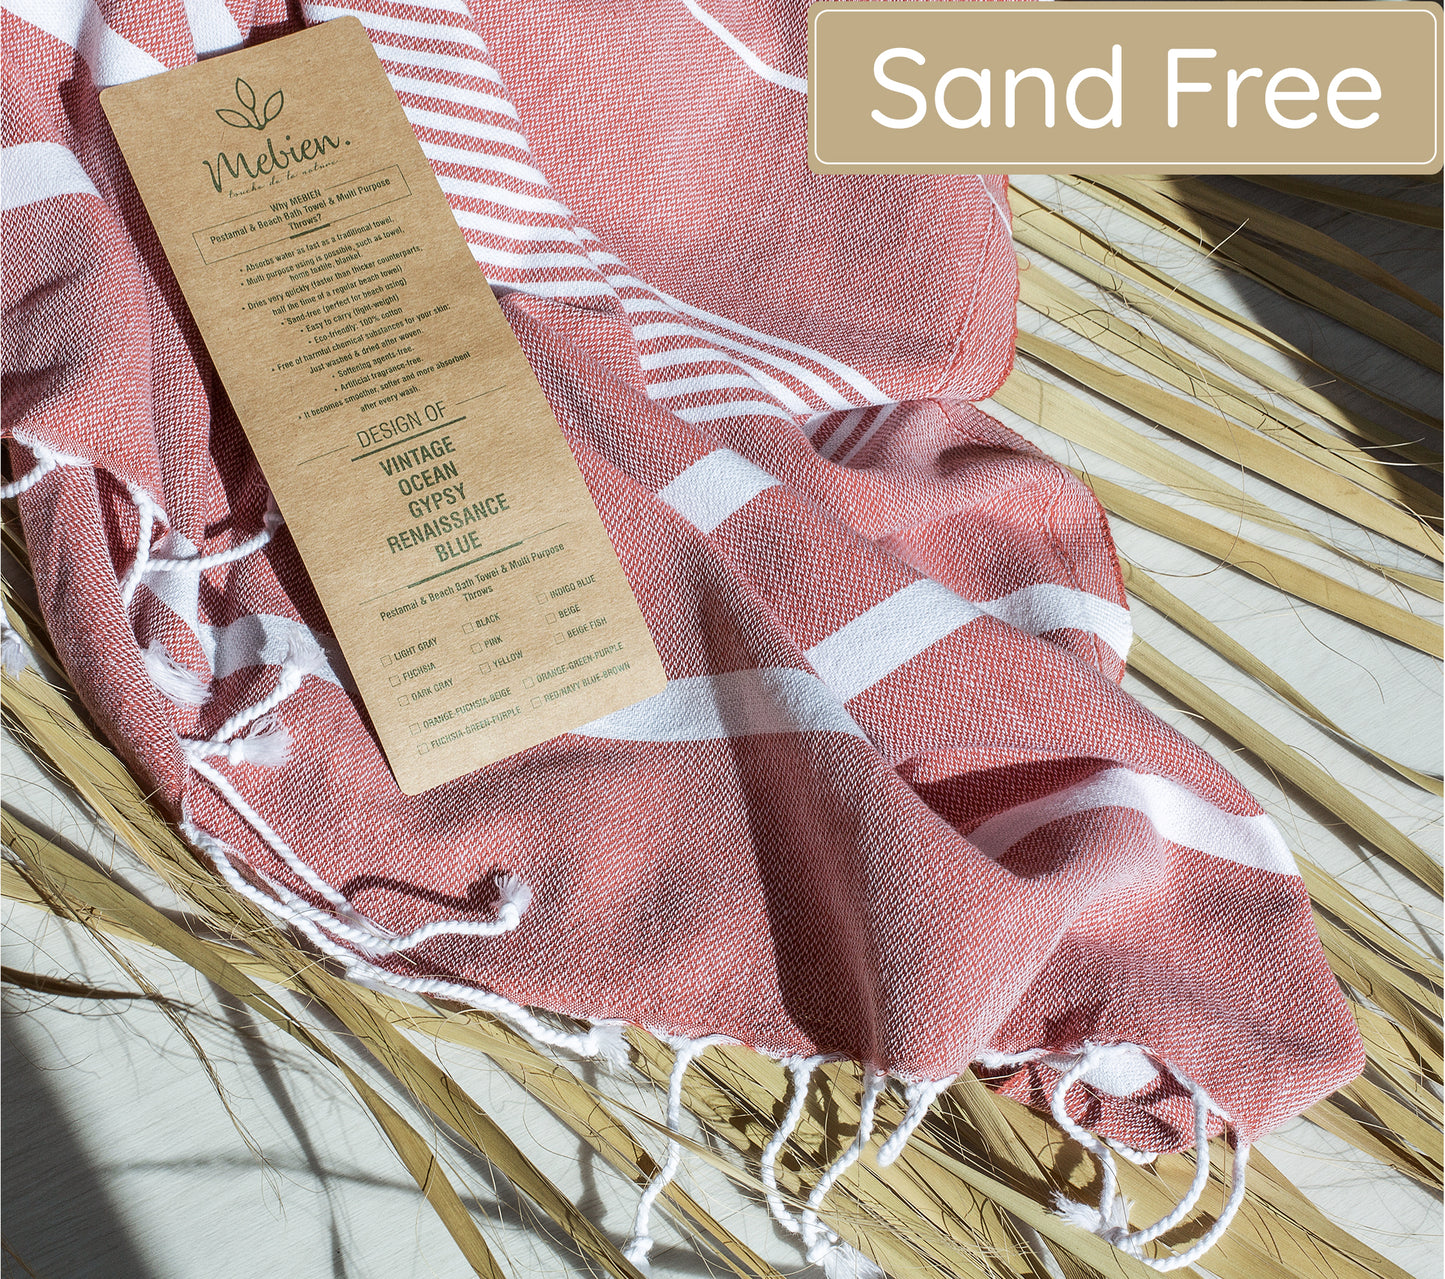 Red Turkish Beach Towel (35”x67”)  Lightweight, Quick drying and Sand Free Can be Used as Beach Blanket 100% Cotton